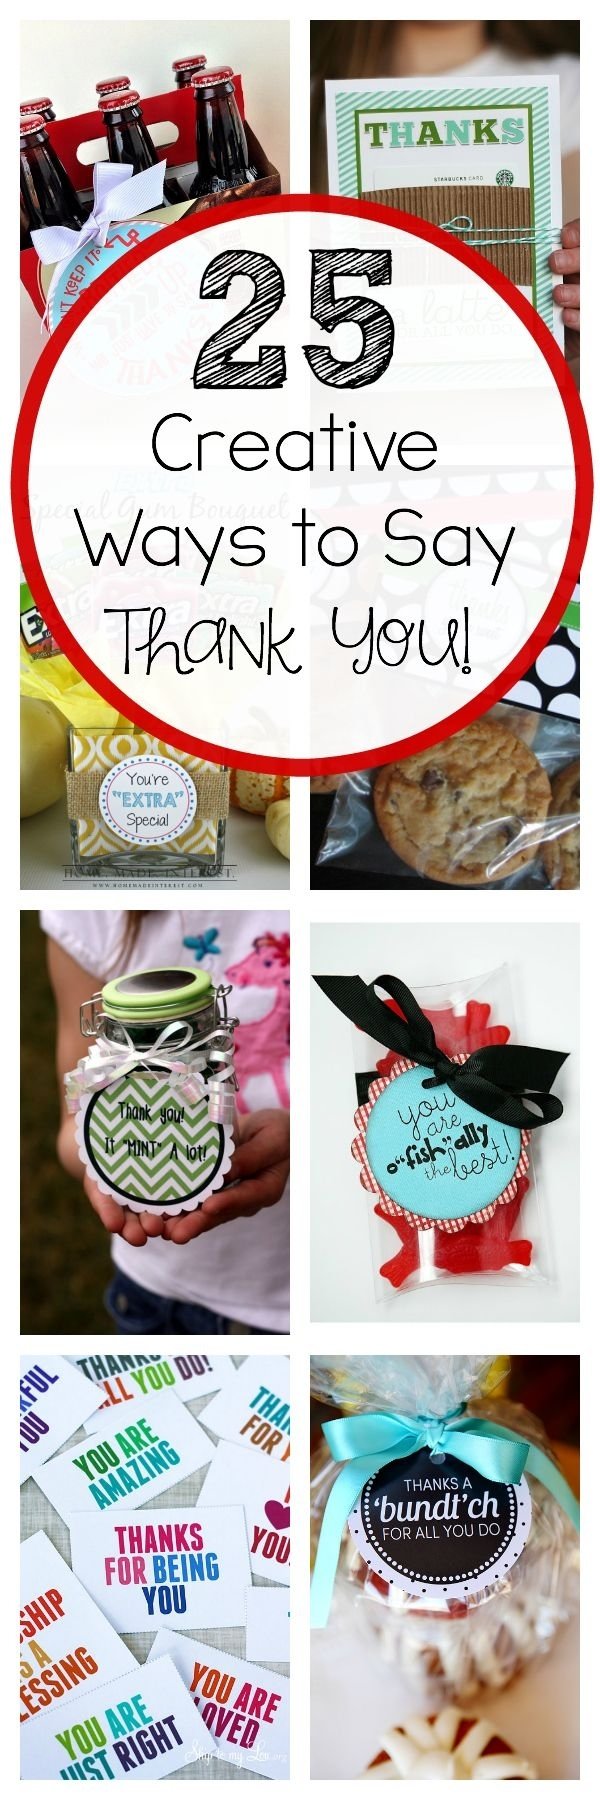 10 Stylish Thank You Gift Ideas For Teachers 103 best thank you gift ideas images on pinterest teacher 2 2022